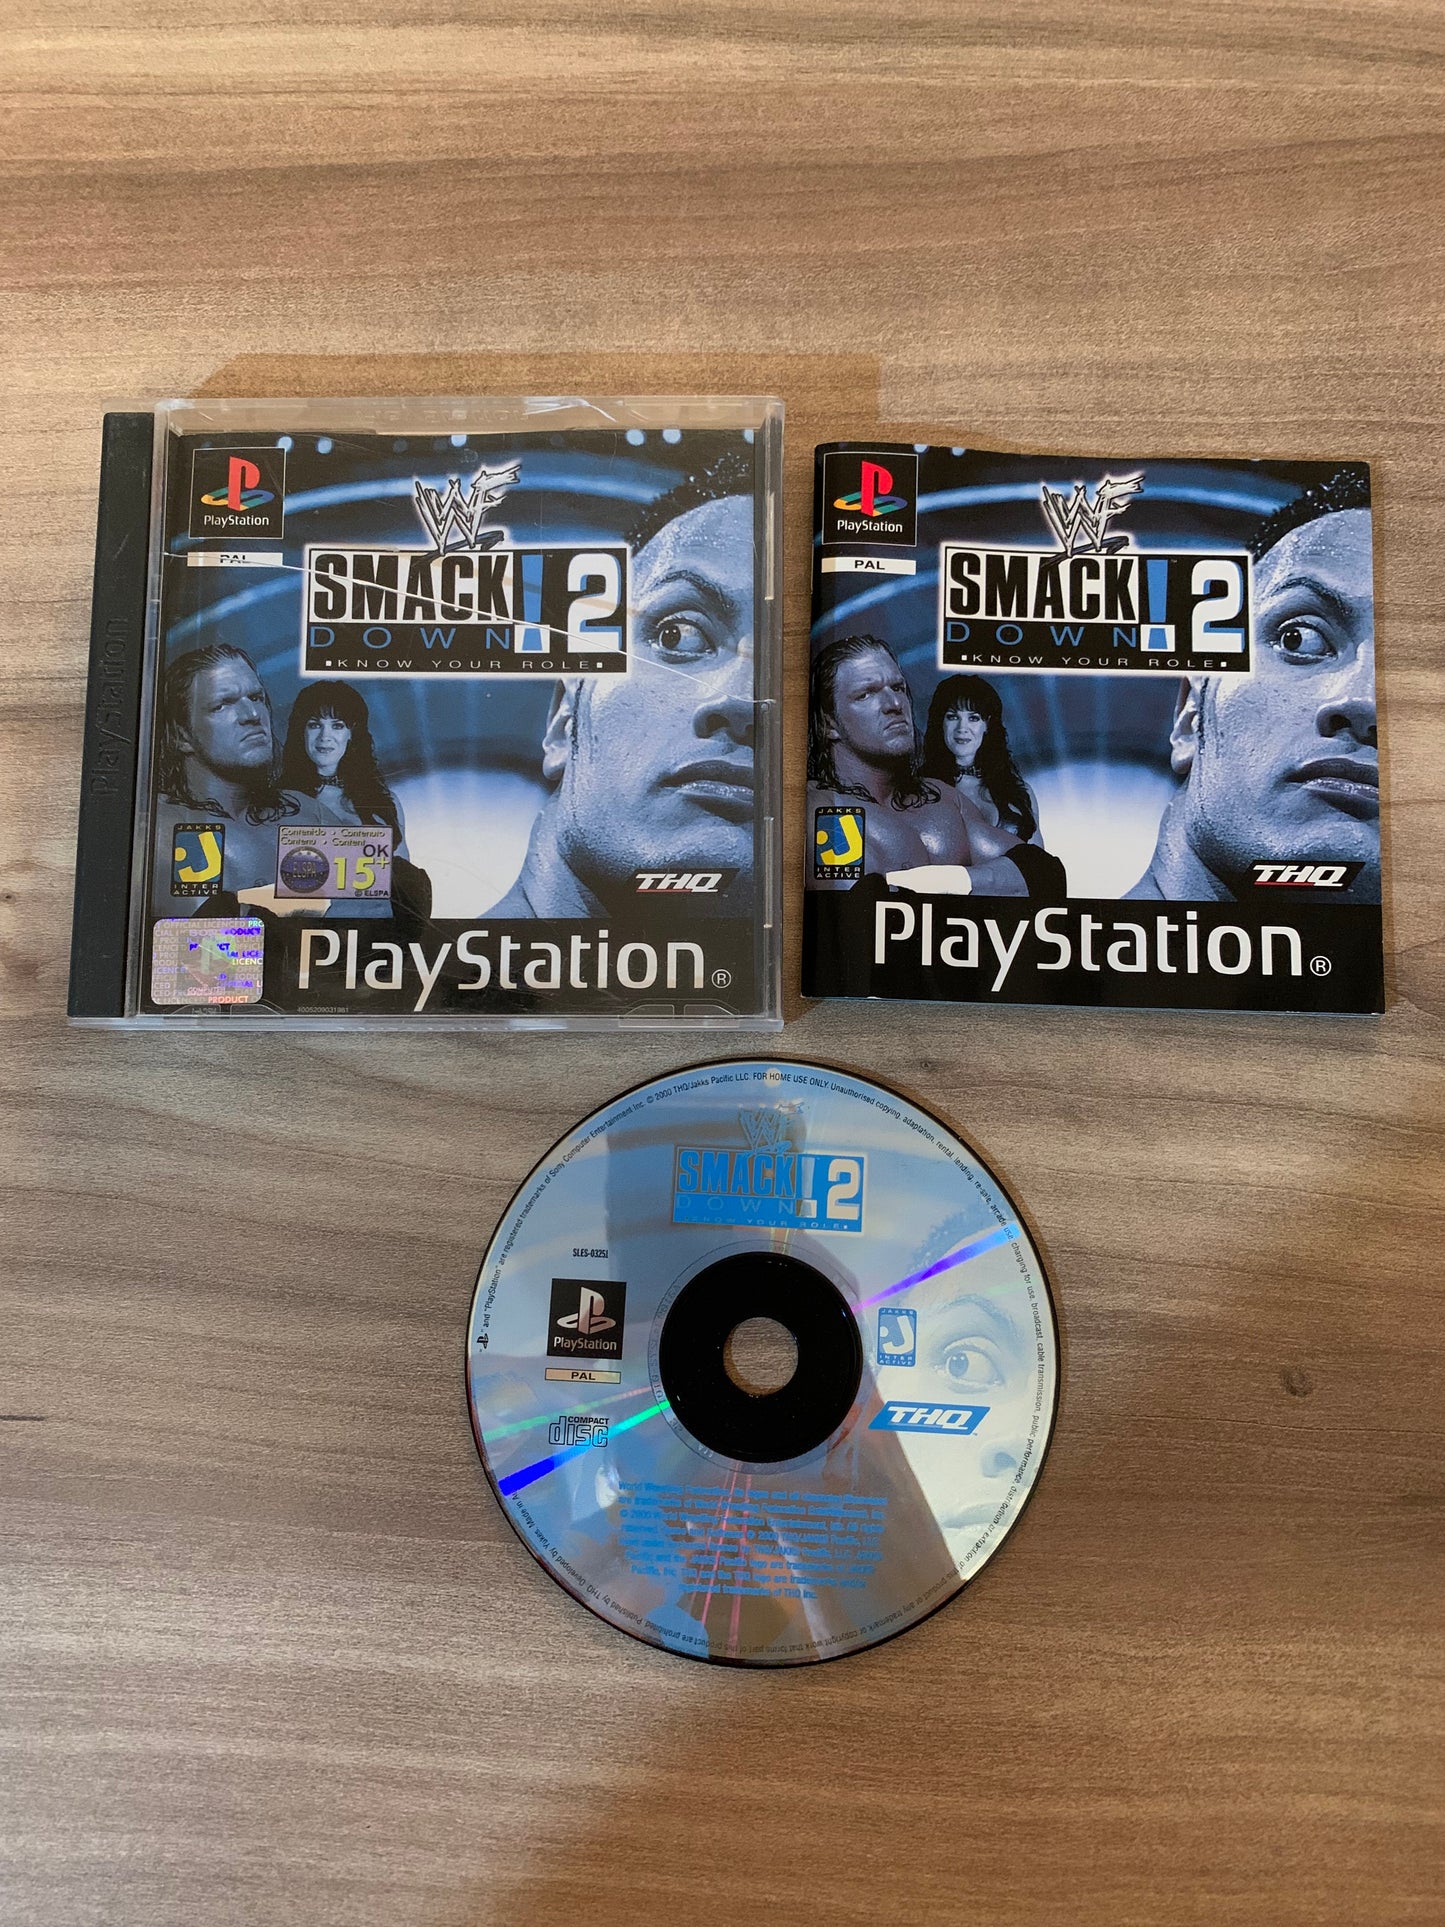 PiXEL-RETRO.COM : SONY PLAYSTATION (PS1) COMPLETE CIB BOX MANUAL GAME PAL WWF SMACKDOWN 2 KNOW YOUR ROLE